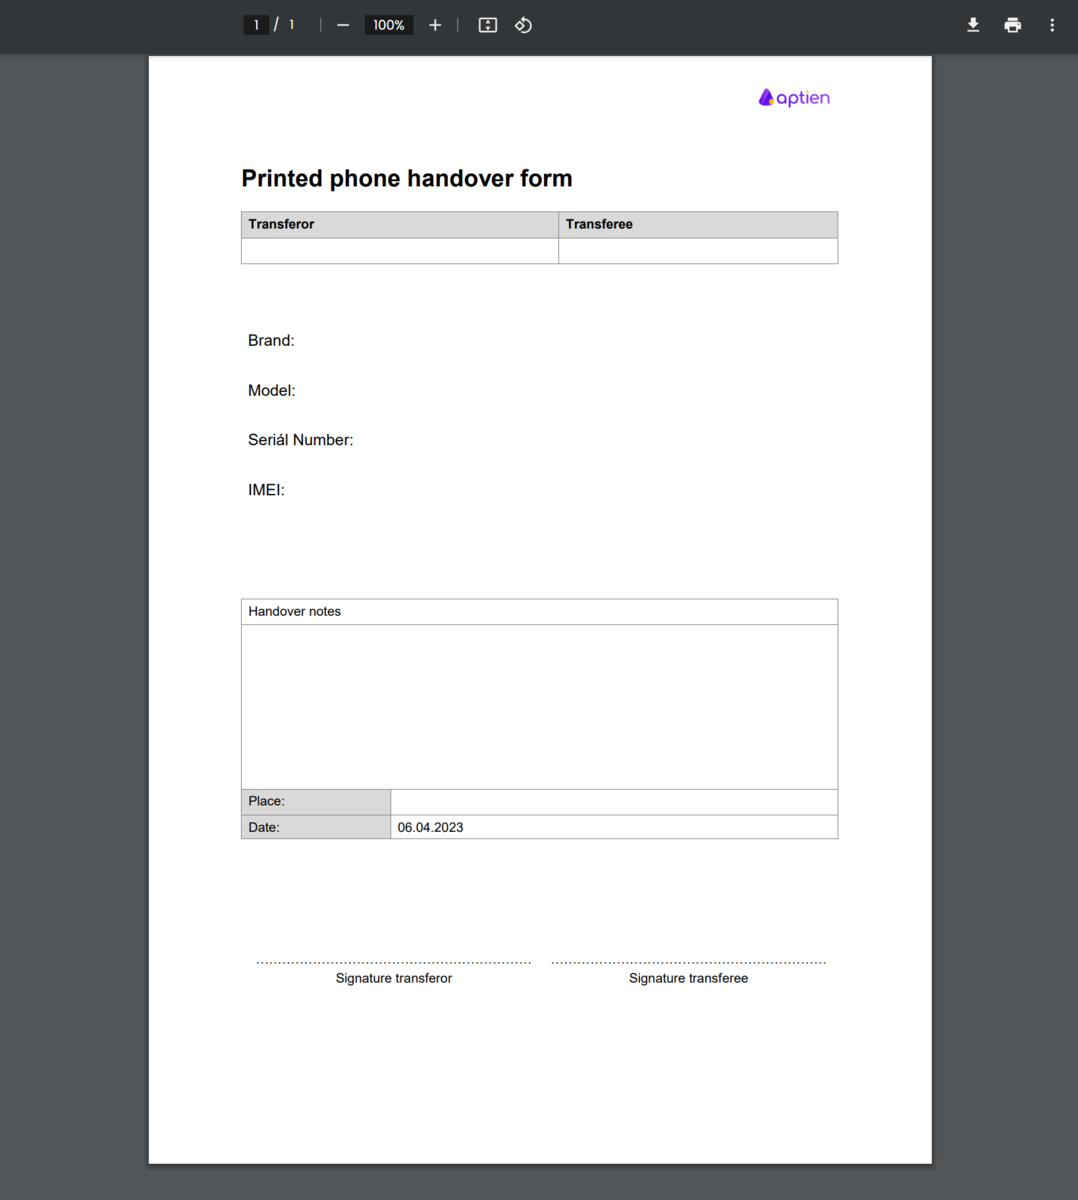 Printed handover form for phones